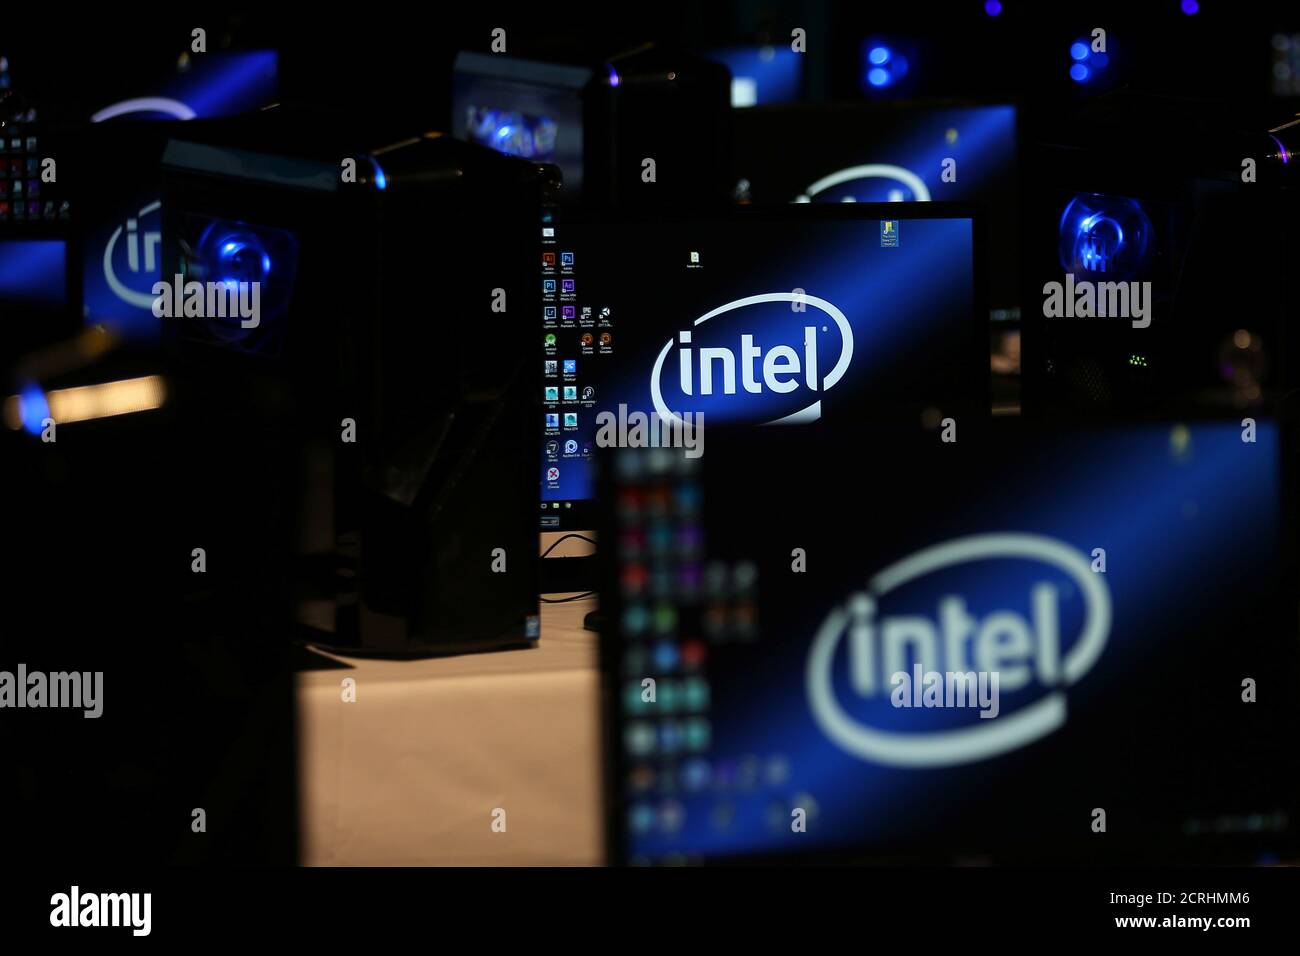 The Intel logo is displayed on computer screens at SIGGRAPH 2017 in Los Angeles, California, U.S. July 31, 2017.  REUTERS/Mike Blake Stock Photo